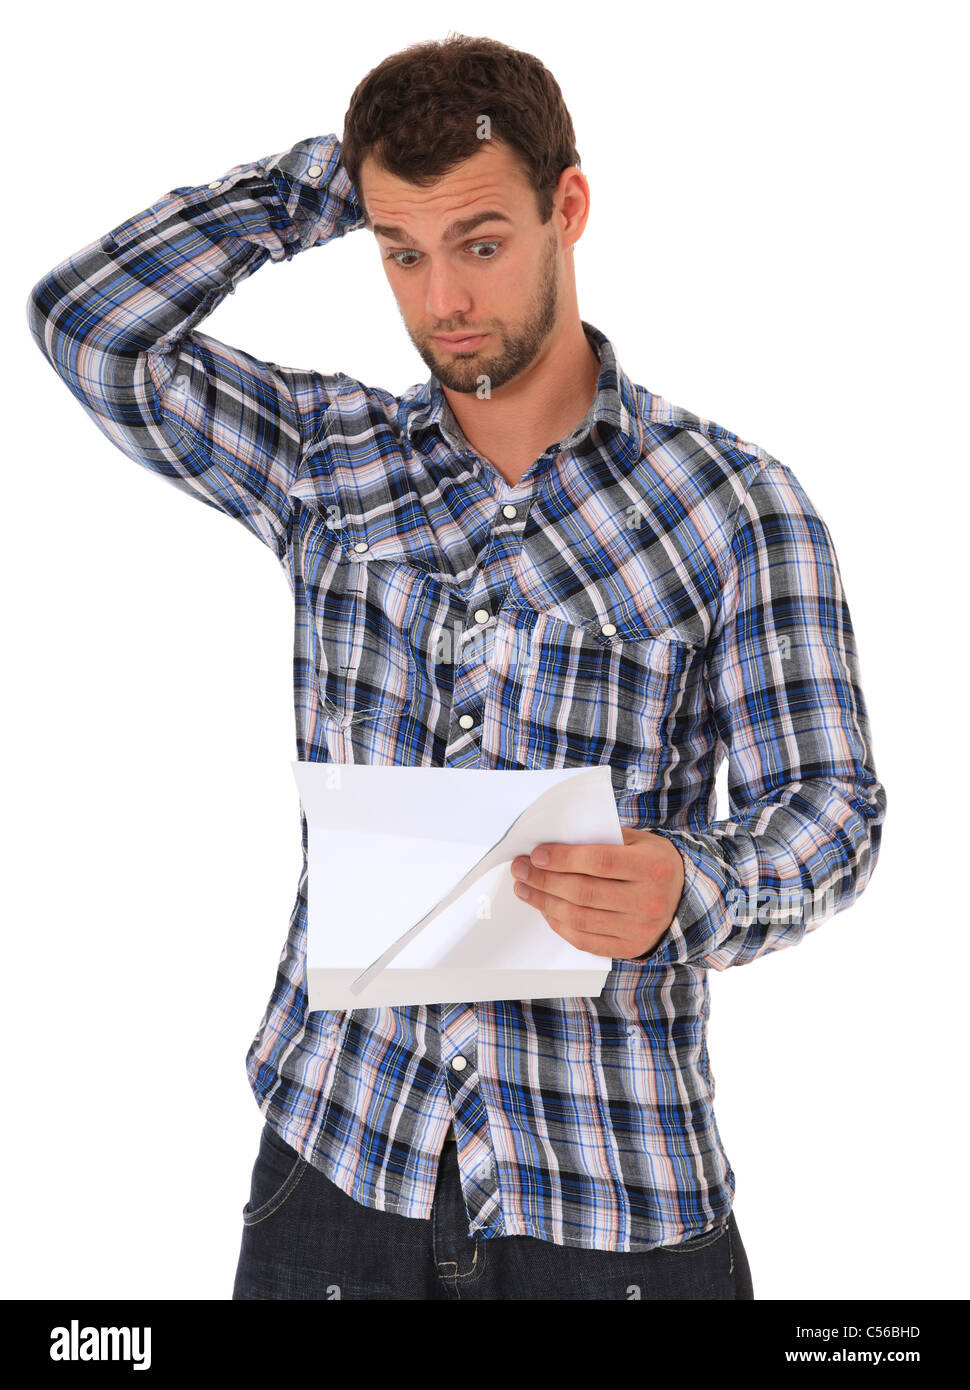 Man getting bad news. All on white background. Stock Photo